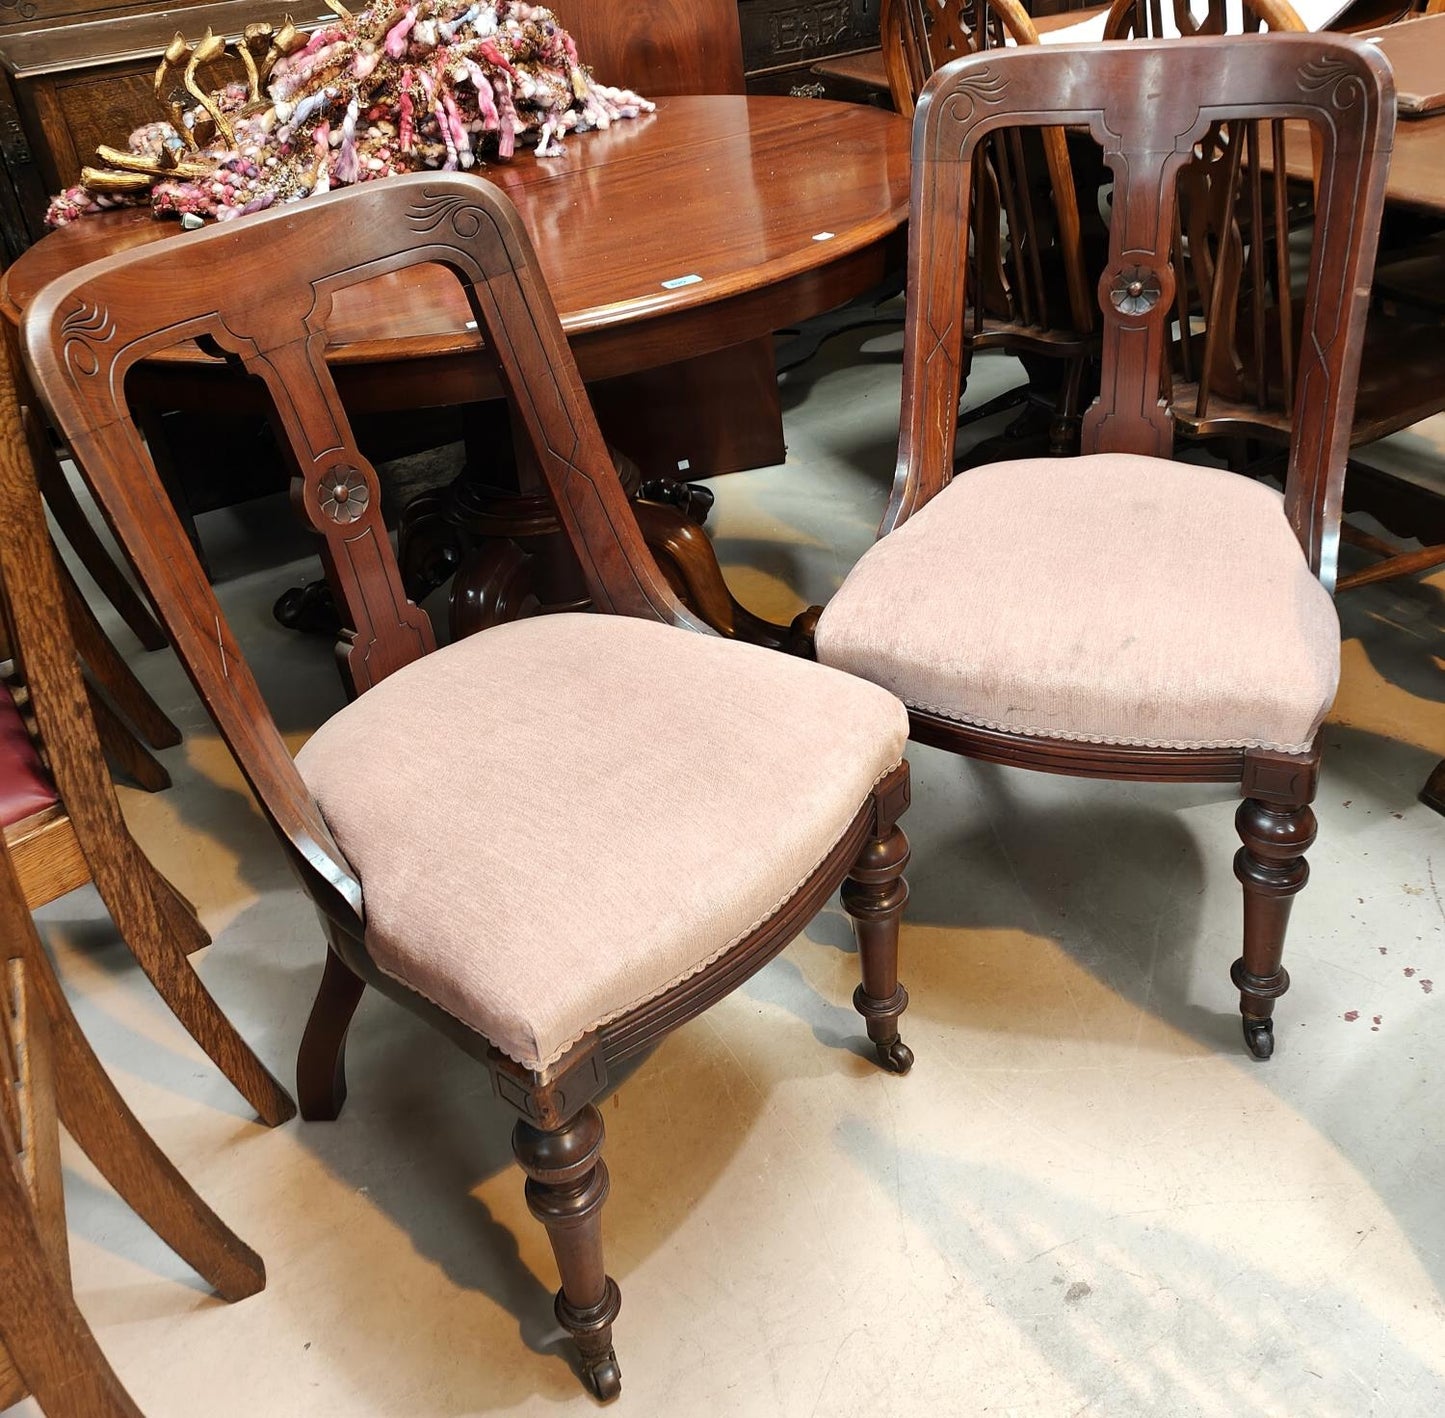 A set of 4 Victorian mahogany spoon back dining chairs with floral seats